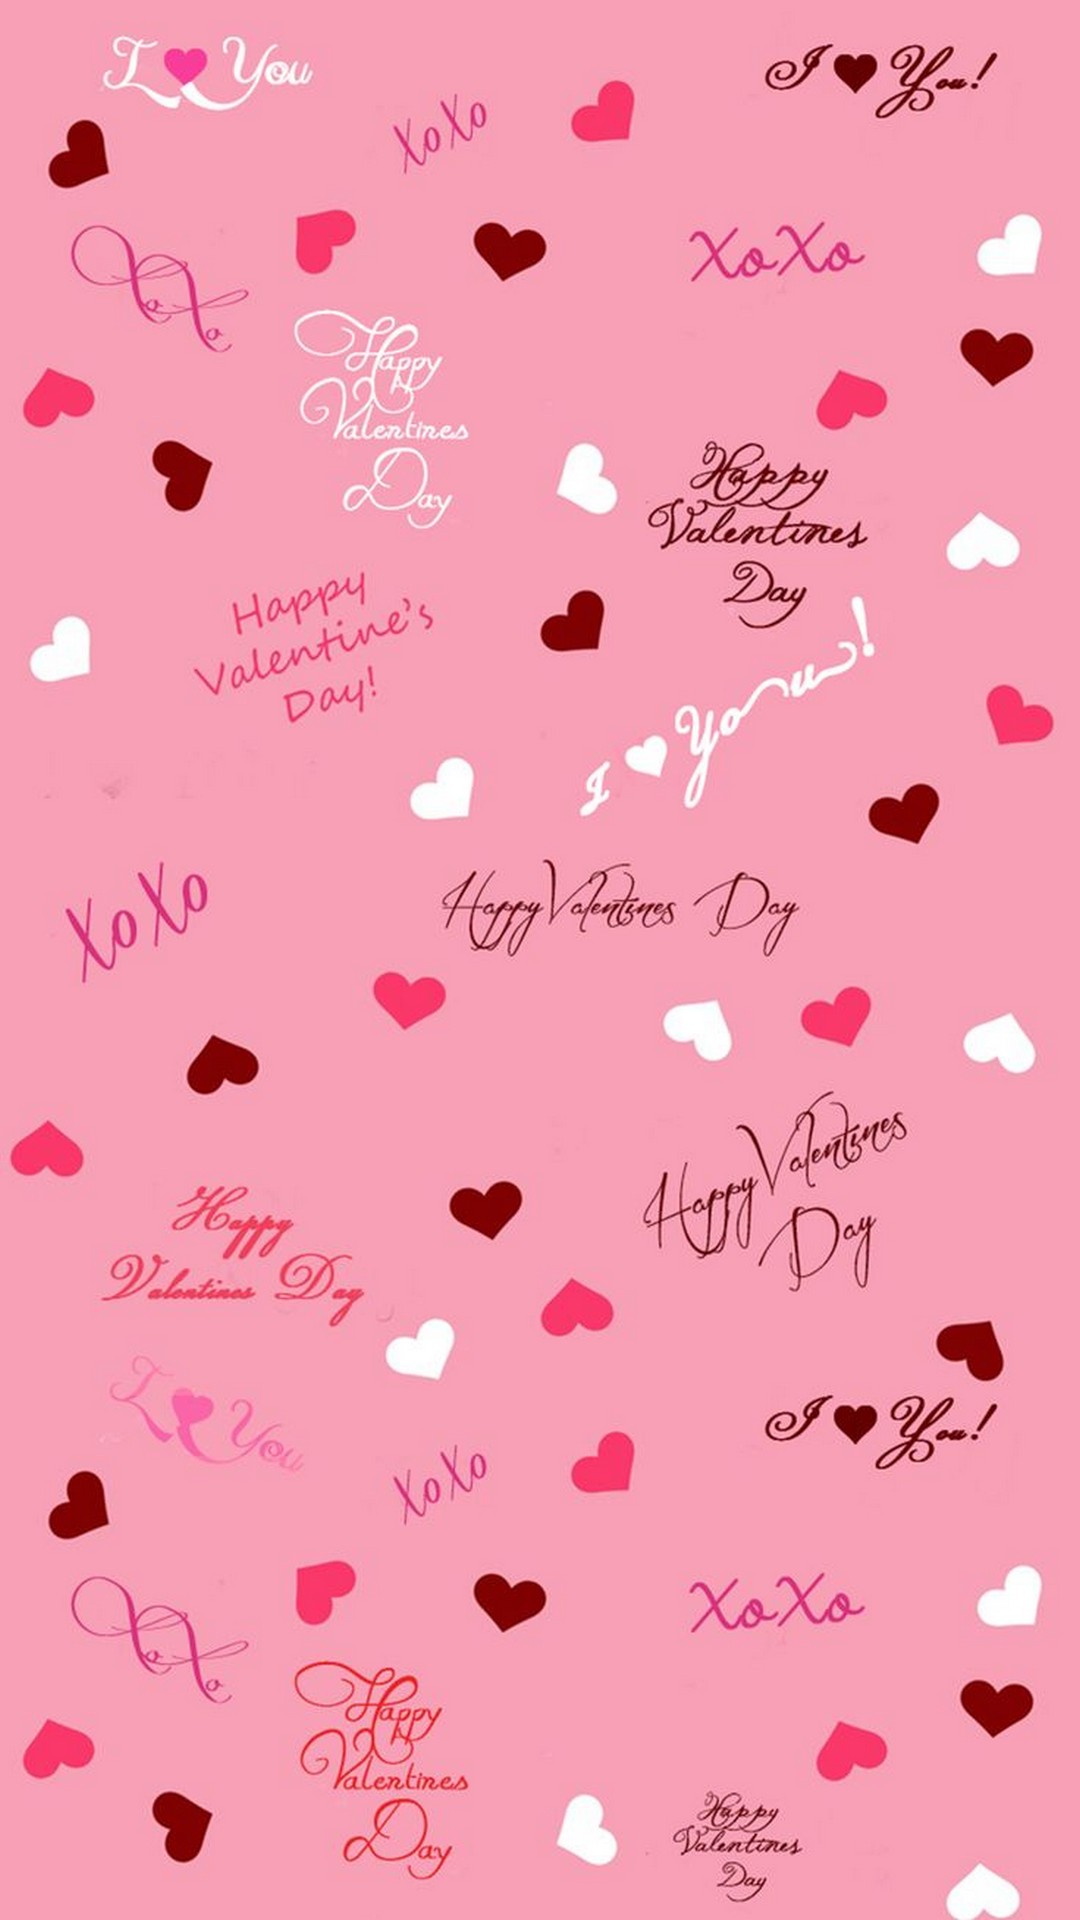 Valentines Day Quotes Android Wallpaper with HD resolution 1080x1920